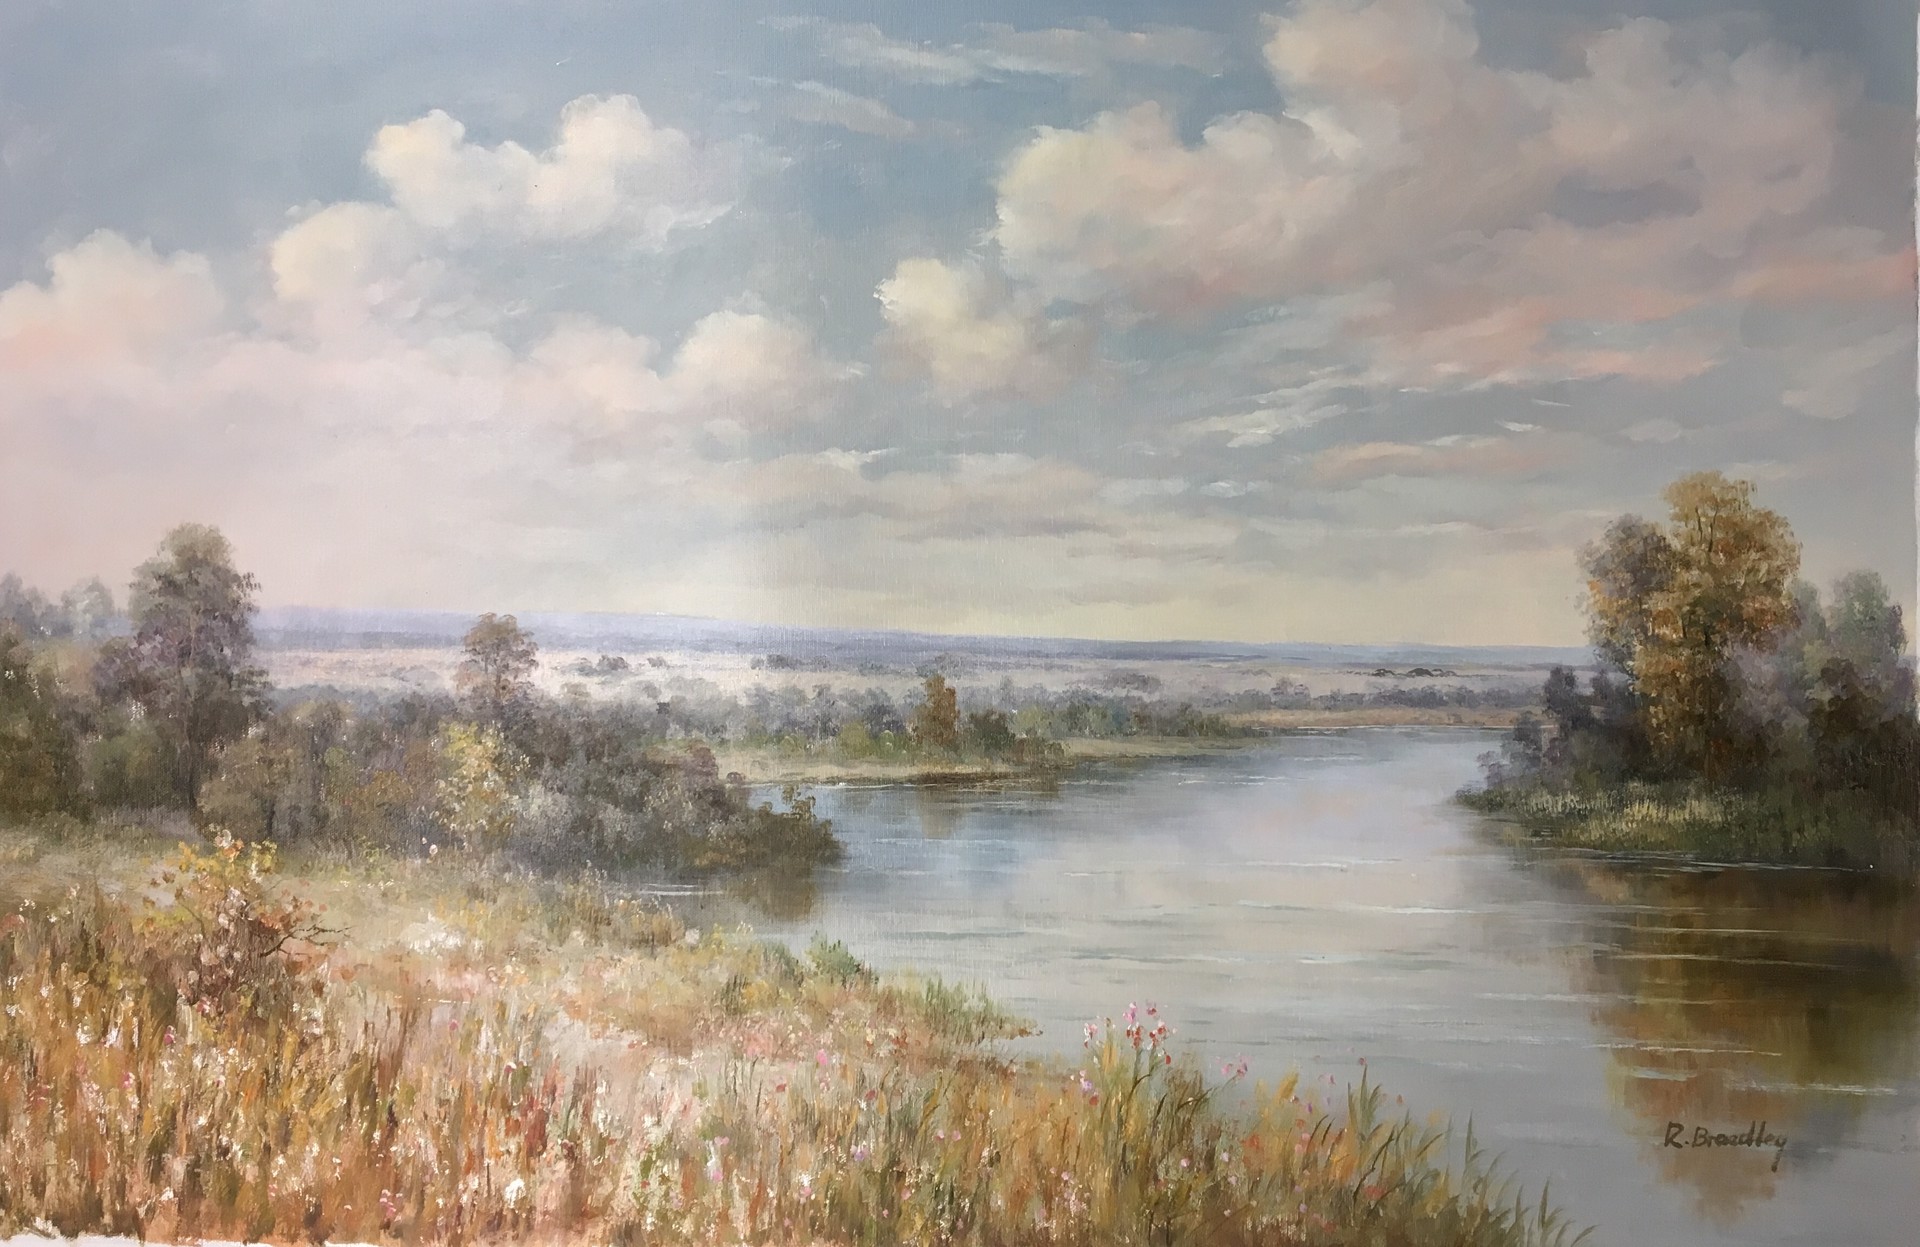 RIVERBEND IN THE VALLEY by R BRADLEY